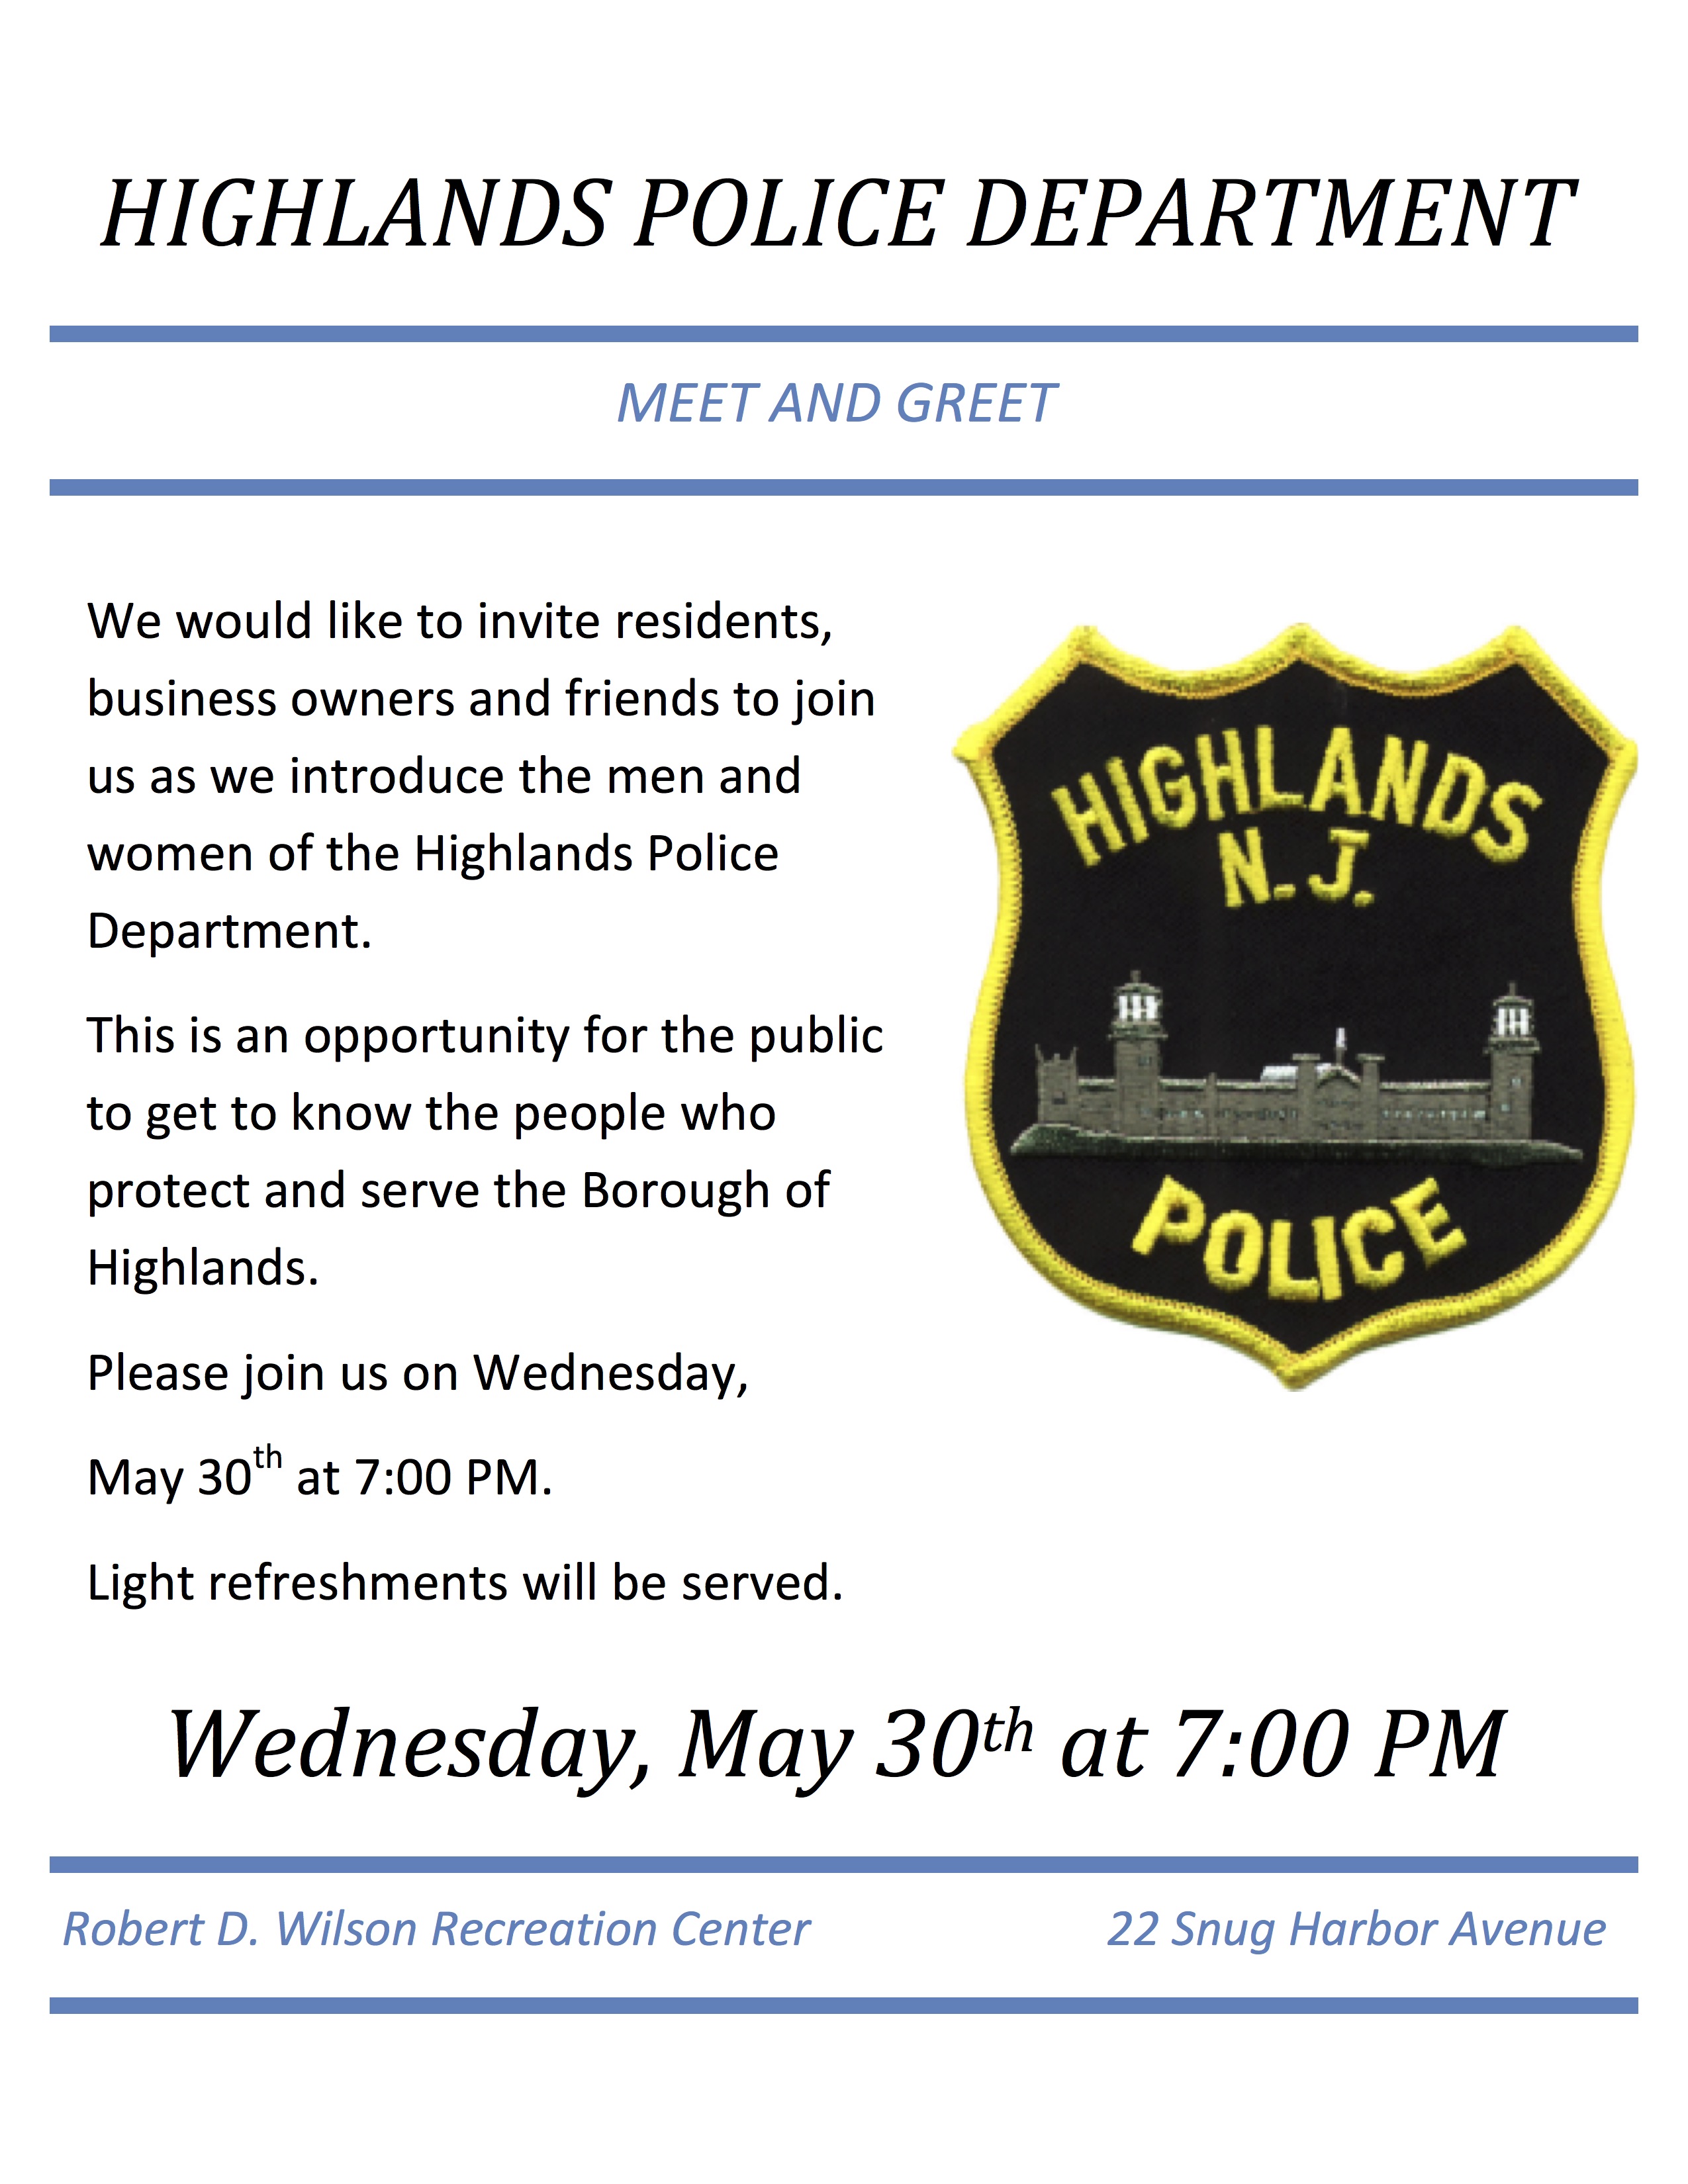 We would like to invite residents, business owners and friends to join us as we introduce the men and women of the Highlands Police Department.    This is an opportunity for the public to get to know the people who protect and serve the Borough of Highlands.